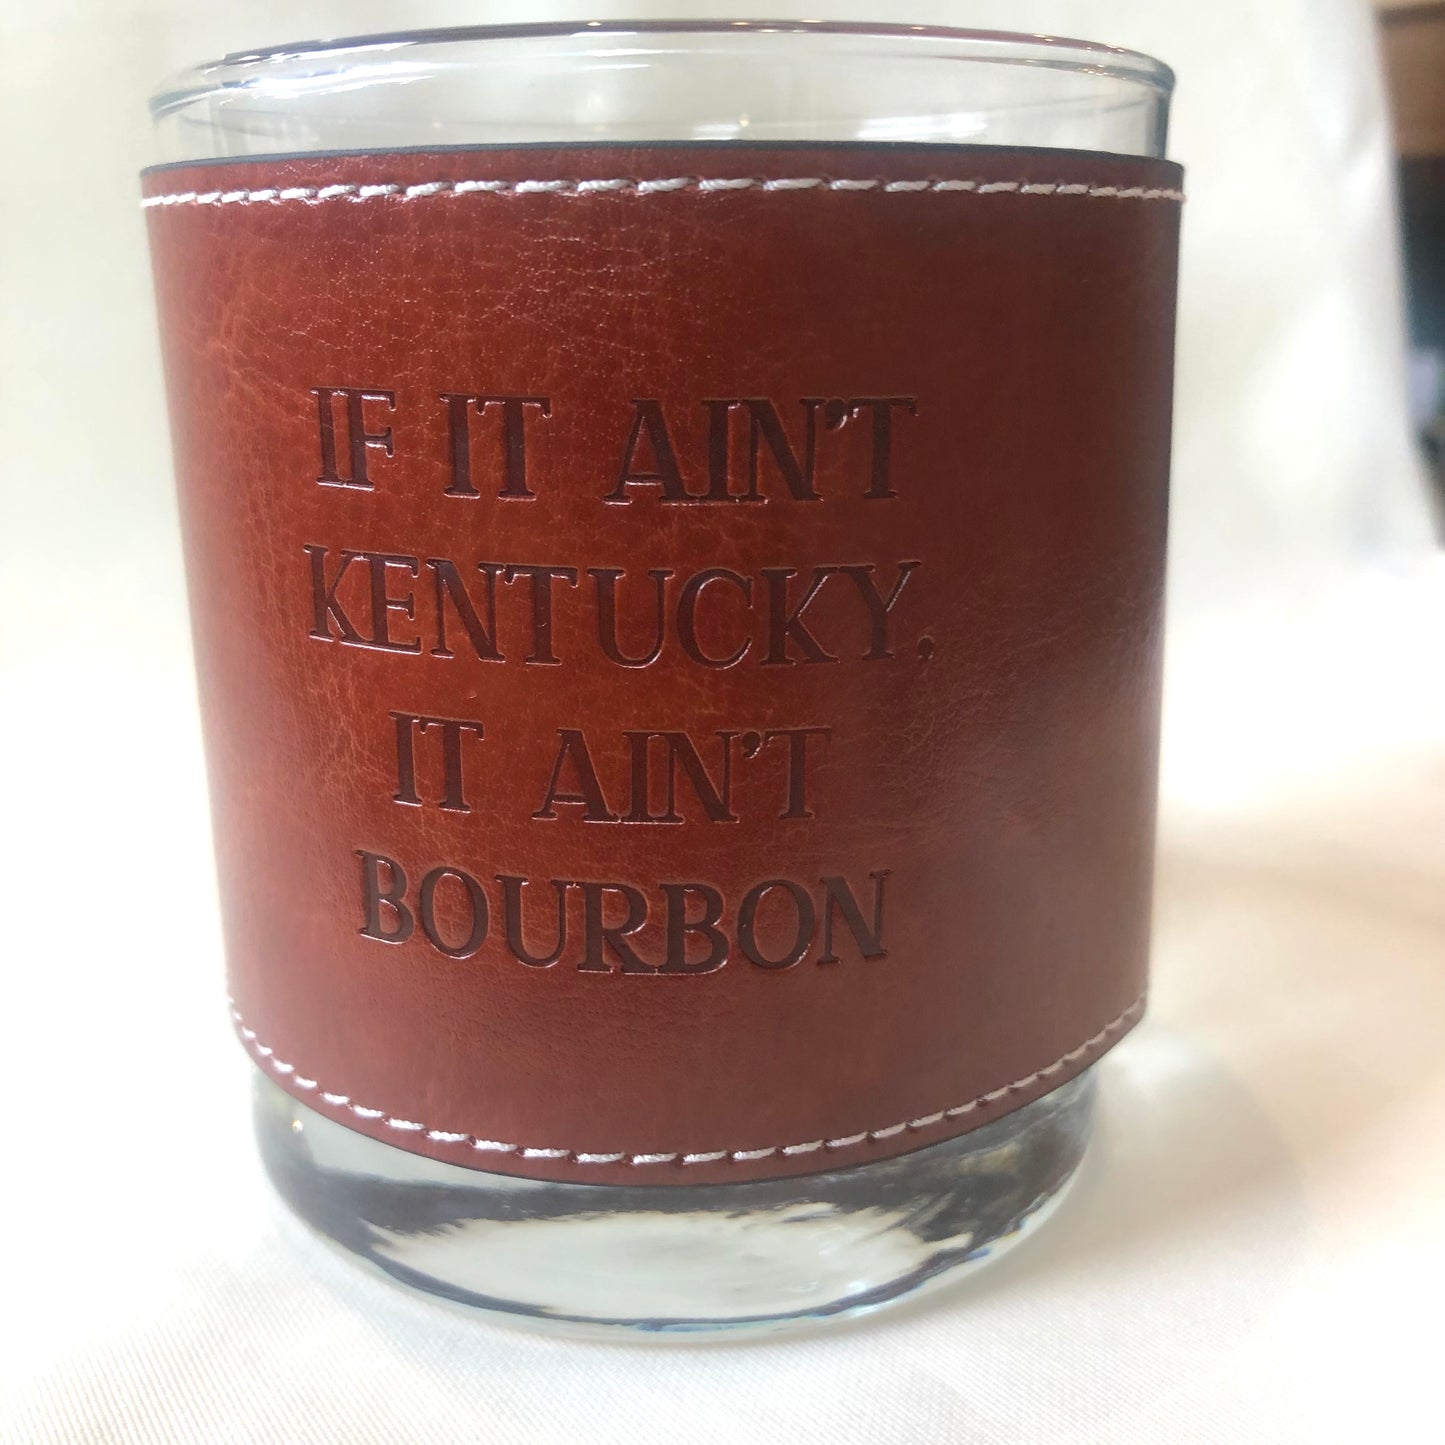 Glass, Leather Wrapped "If It Ain't Kentucky, It Ain't Bourbon"